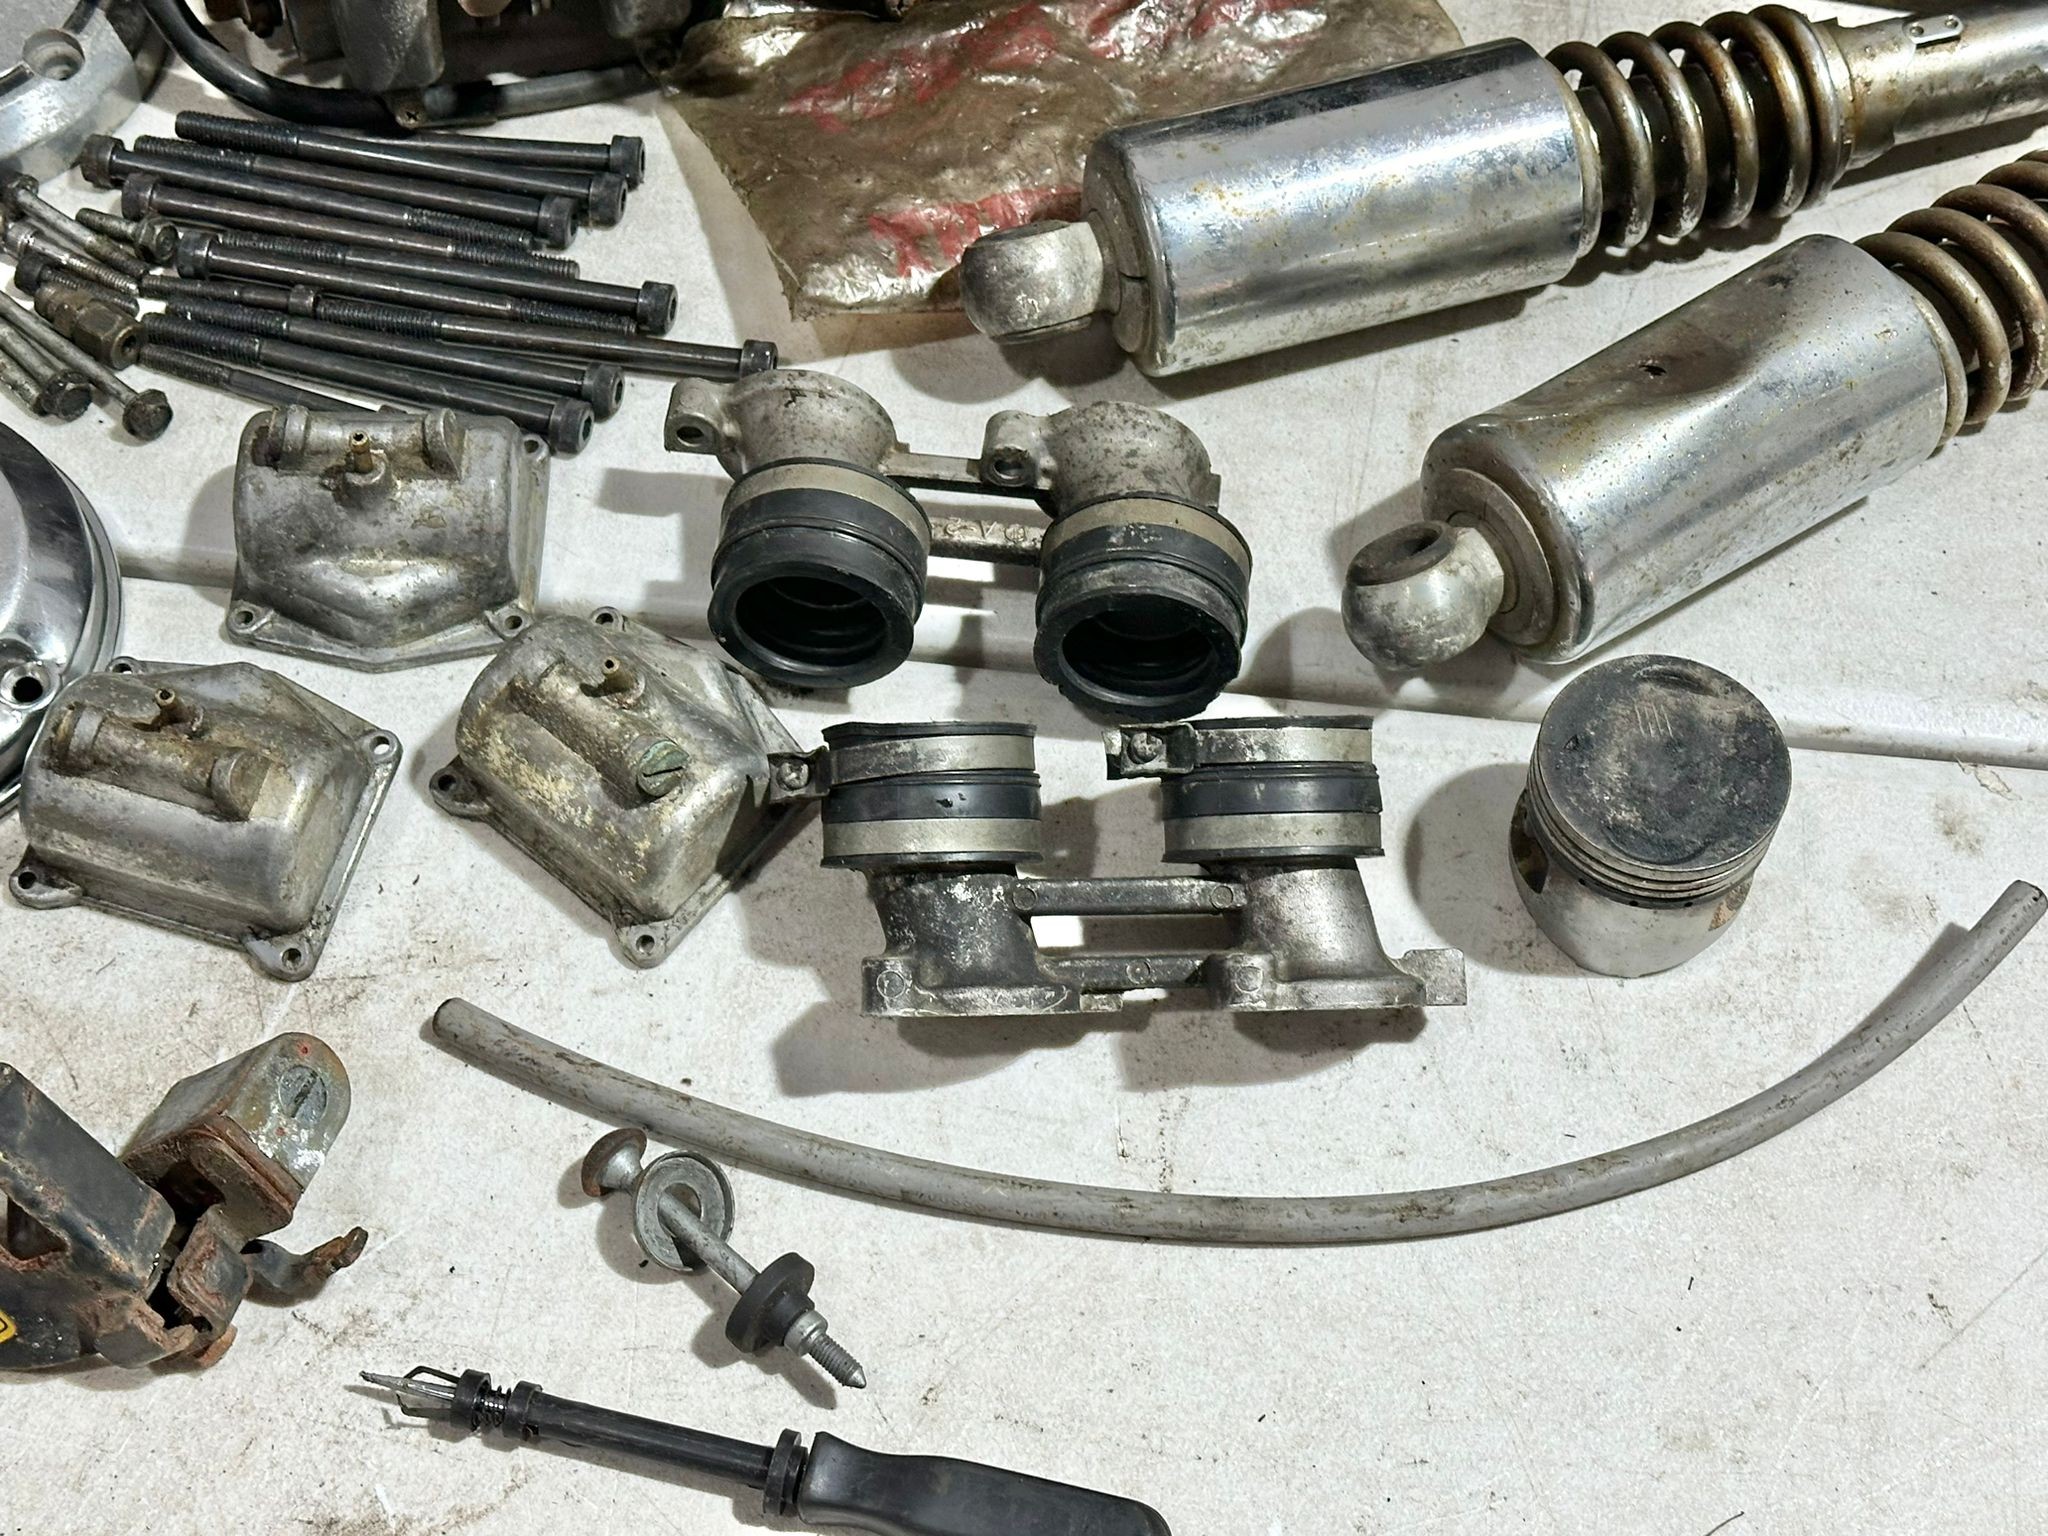 Honda CB500-4 parts with engine - Image 5 of 20